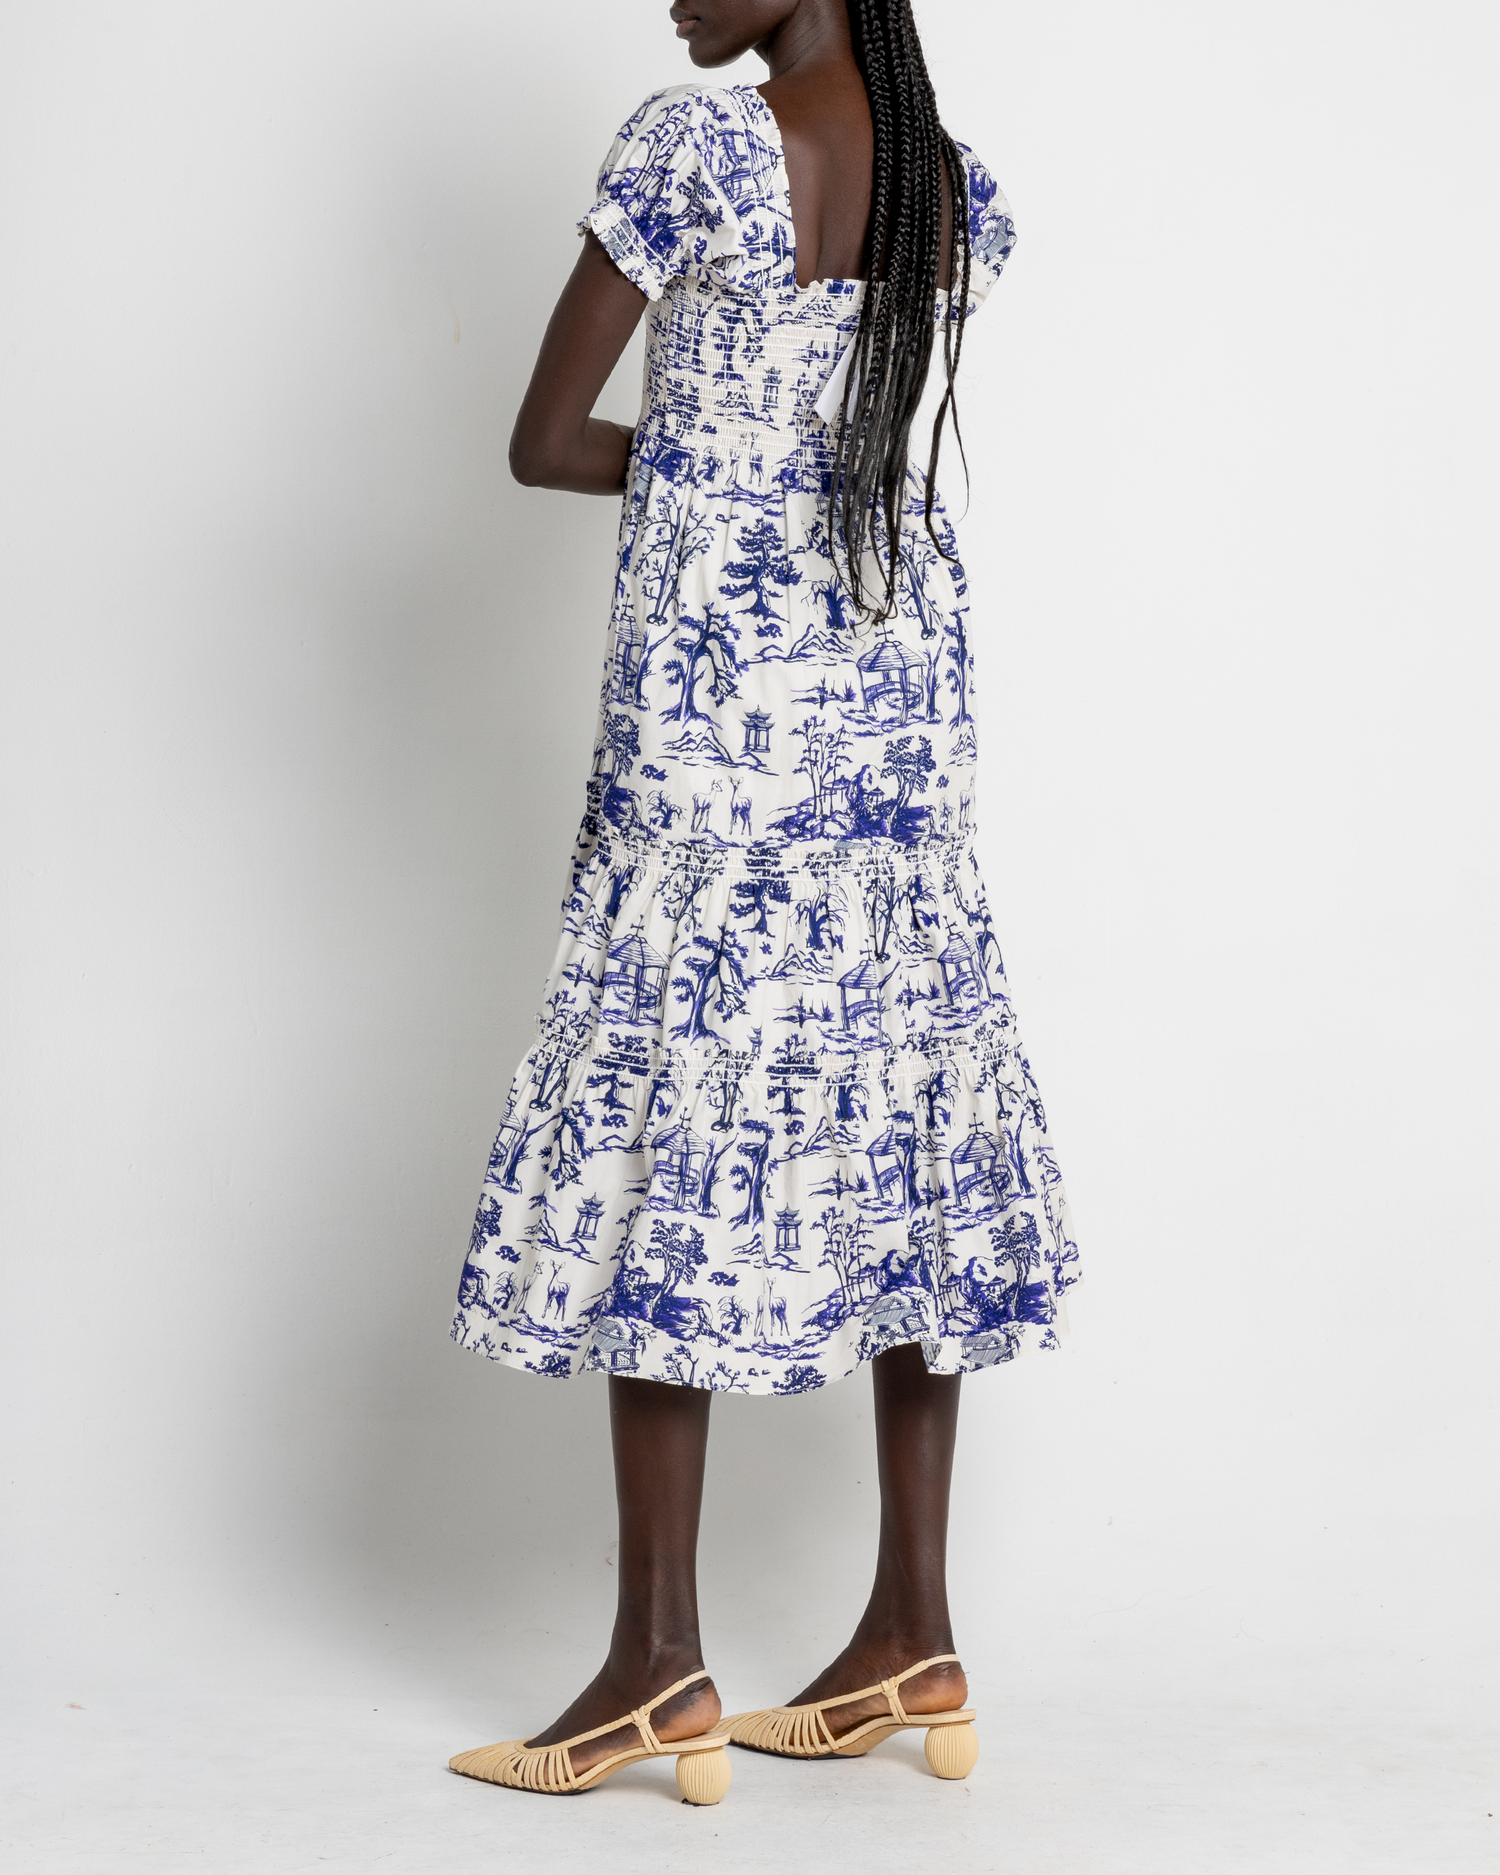 Third image of Square Neck Smocked Maxi Dress, a blue maxi dress,smocked, puff sleeves, short sleeves, toile